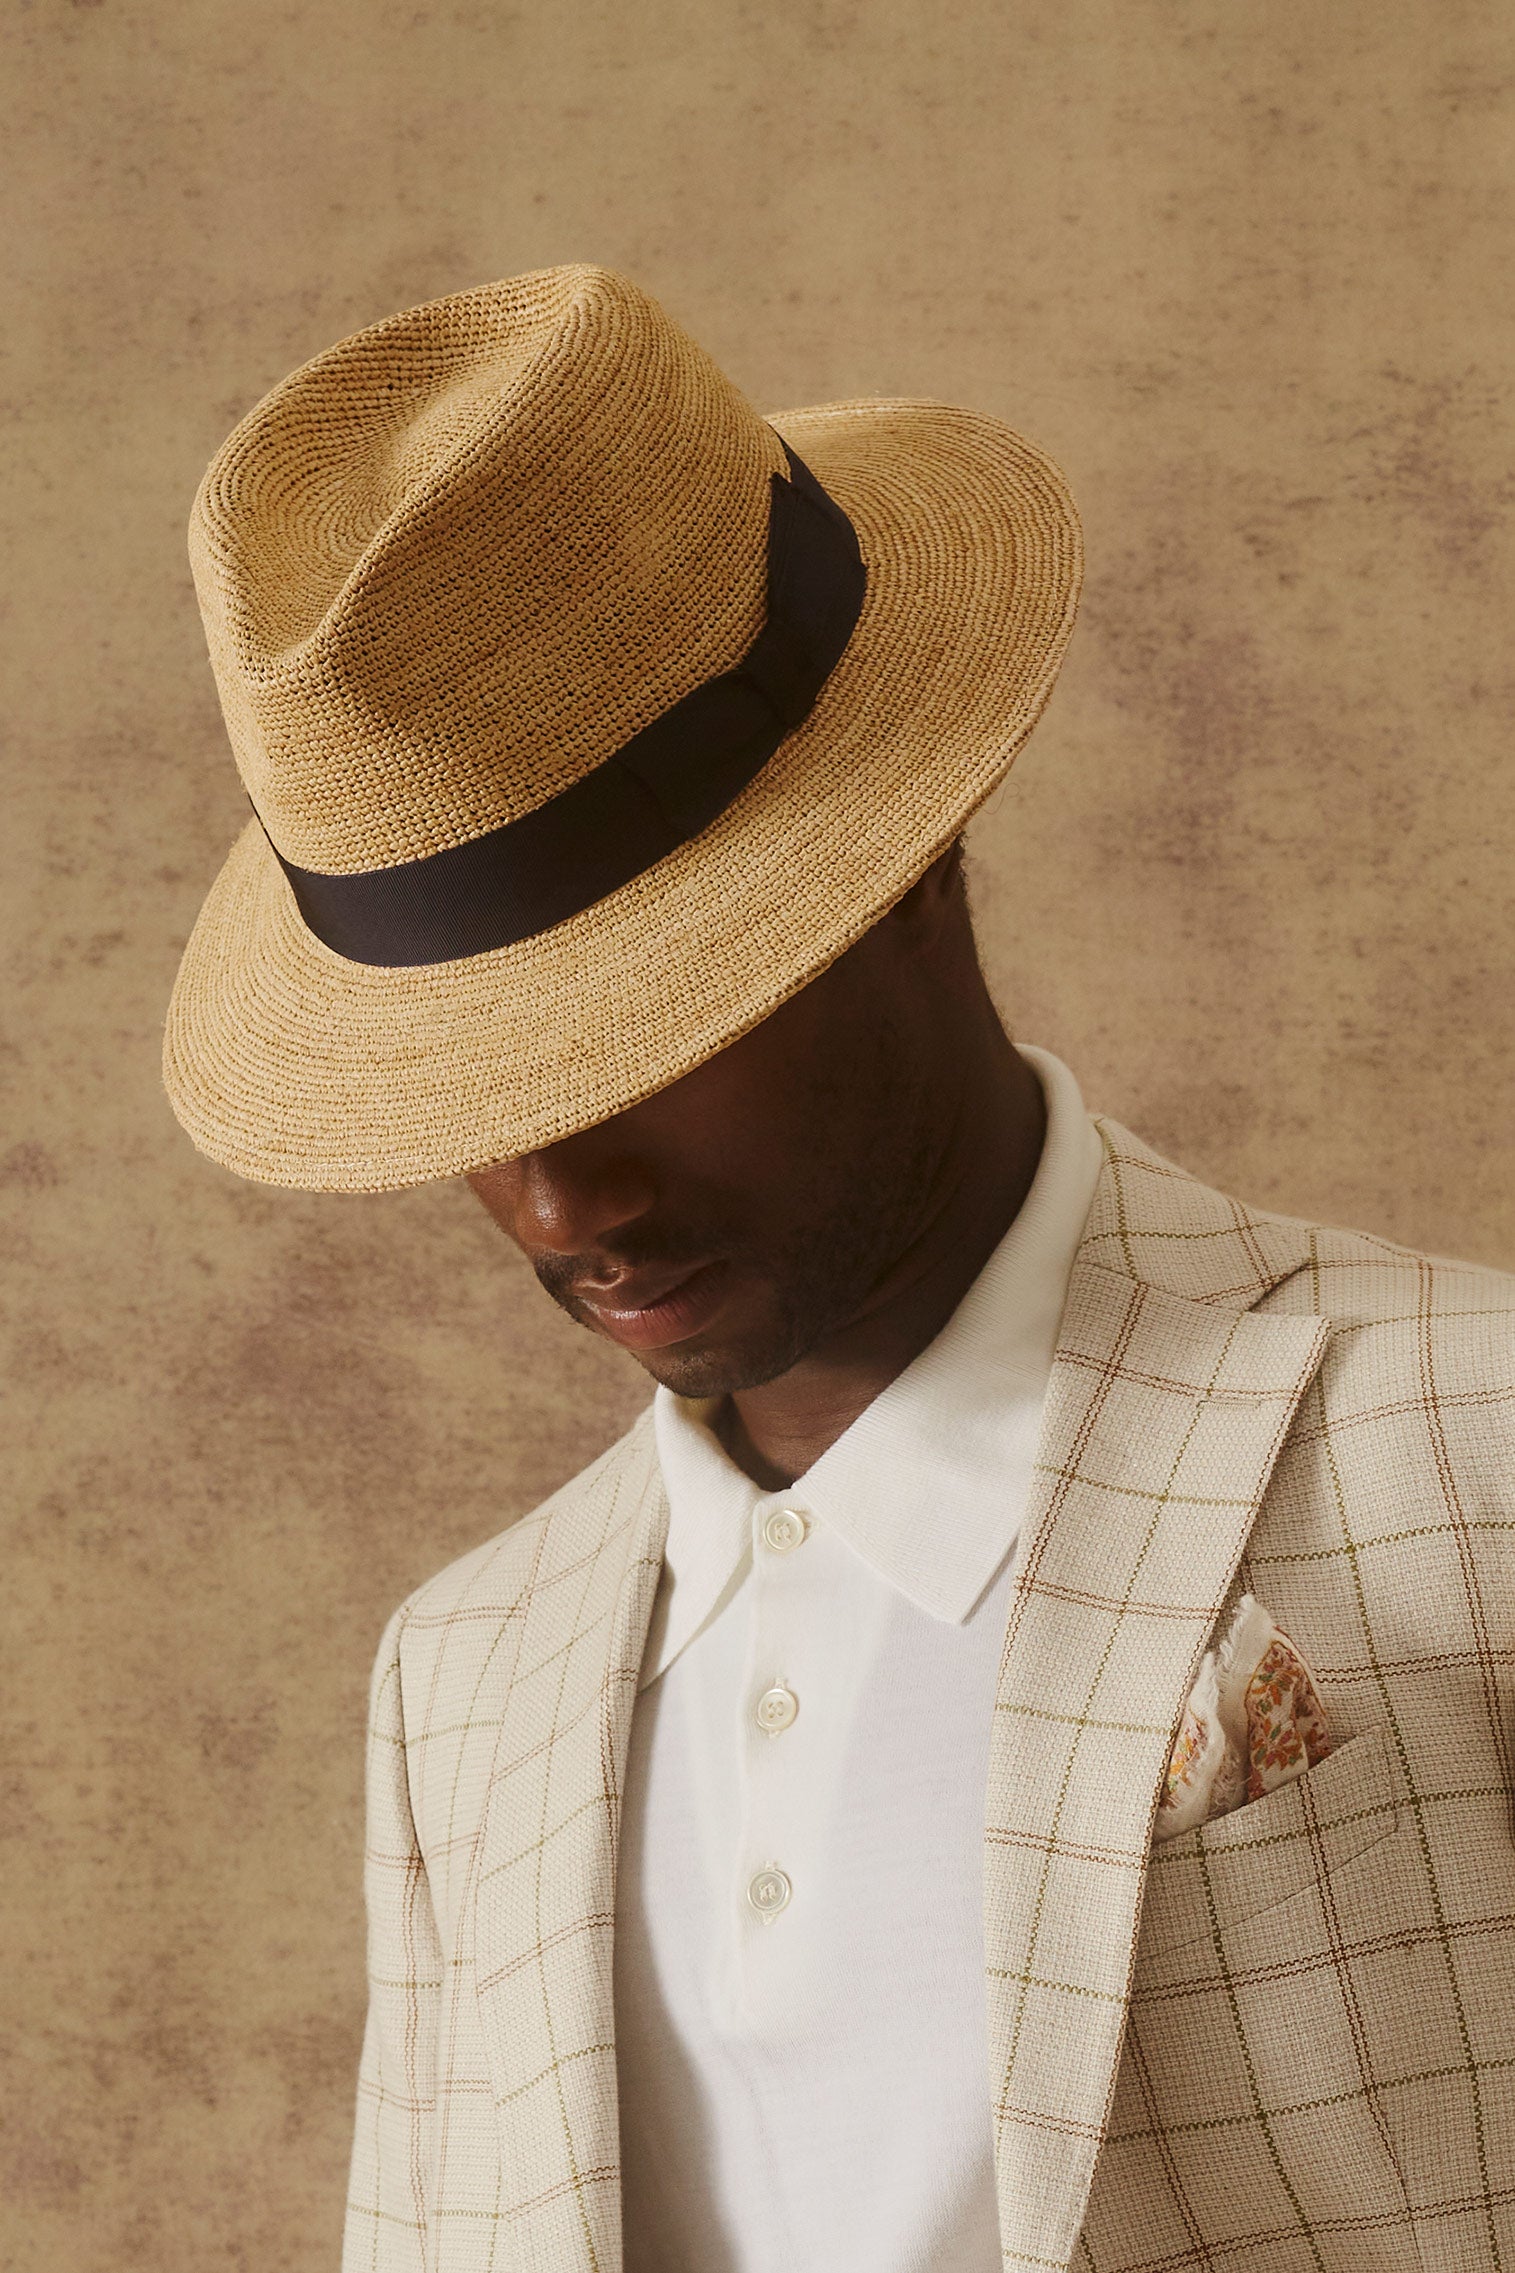 St Louis Trilby - Hats for Tall People - Lock & Co. Hatters London UK